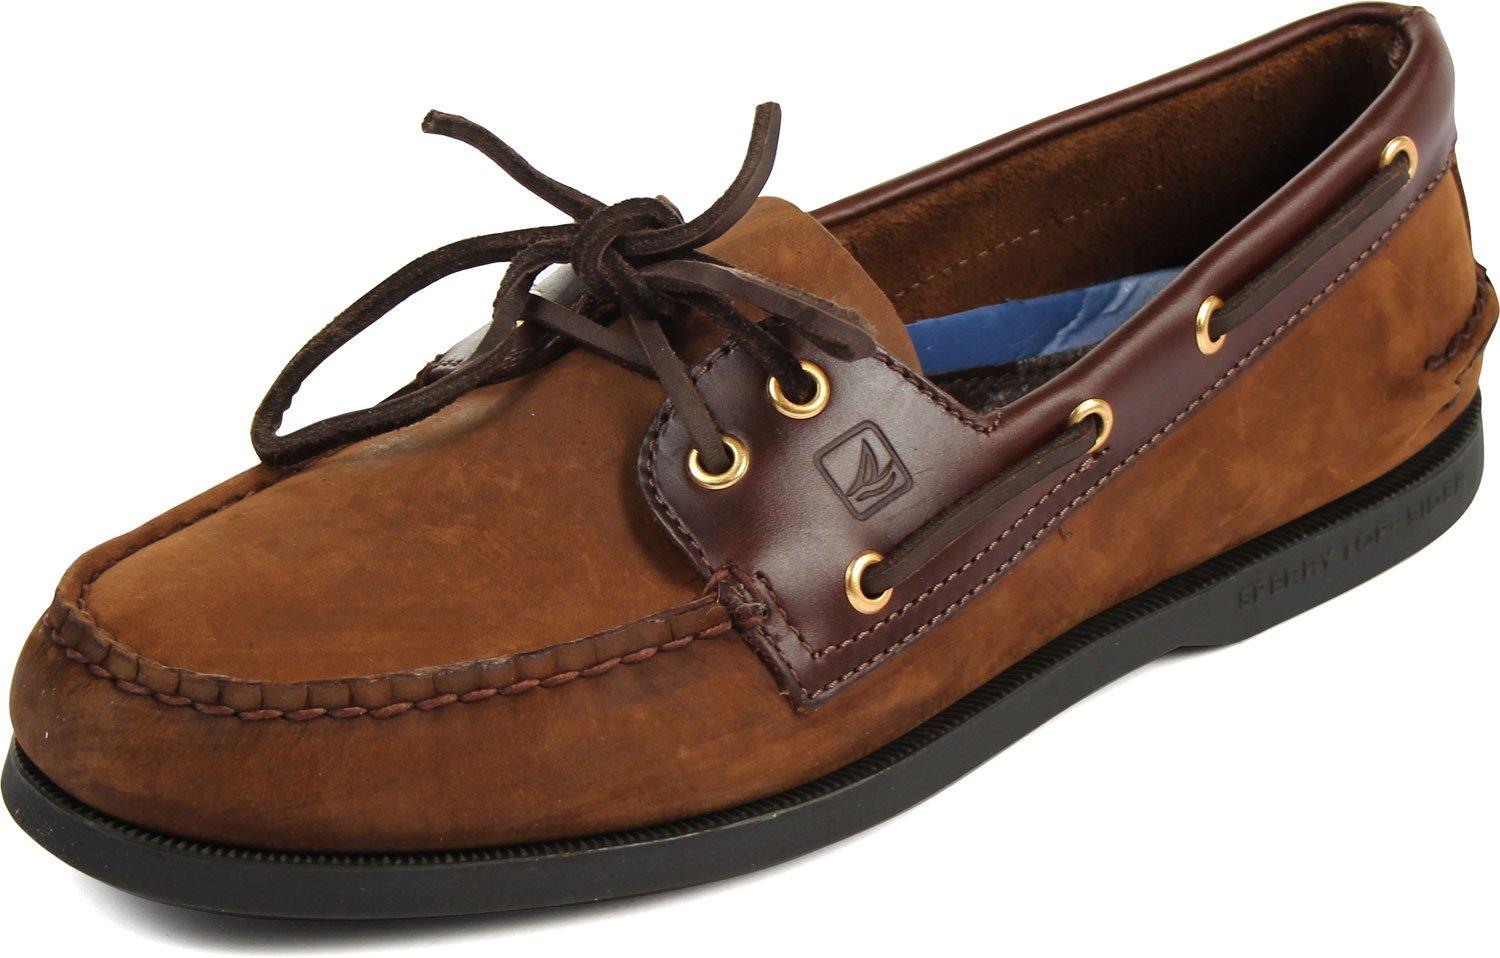 Sperry Top-Sider Leather Mens 195412 Boat Shoe in Brown ...